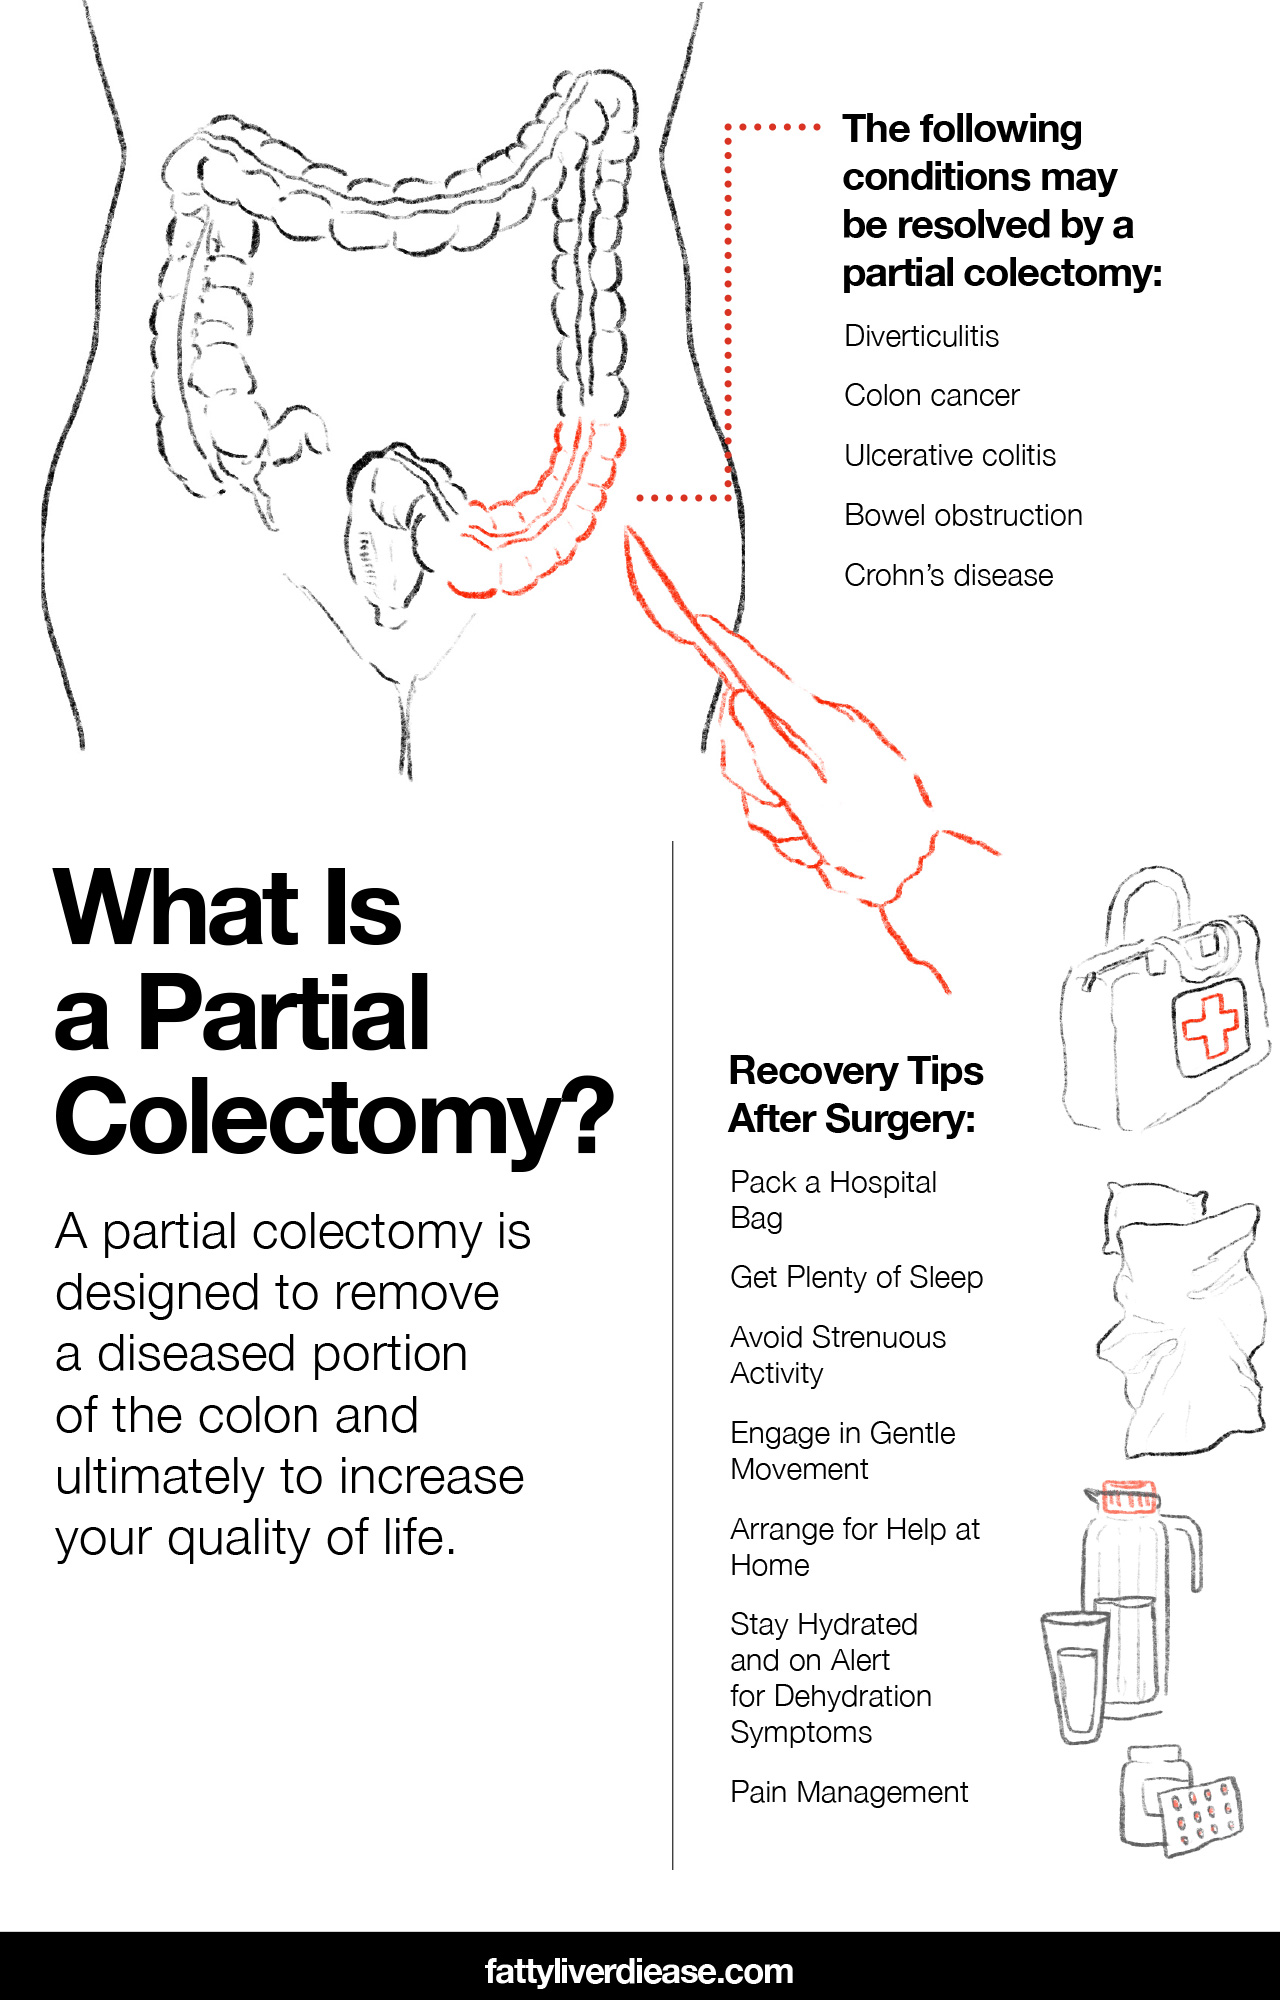 What Is a Partial Colectomy?